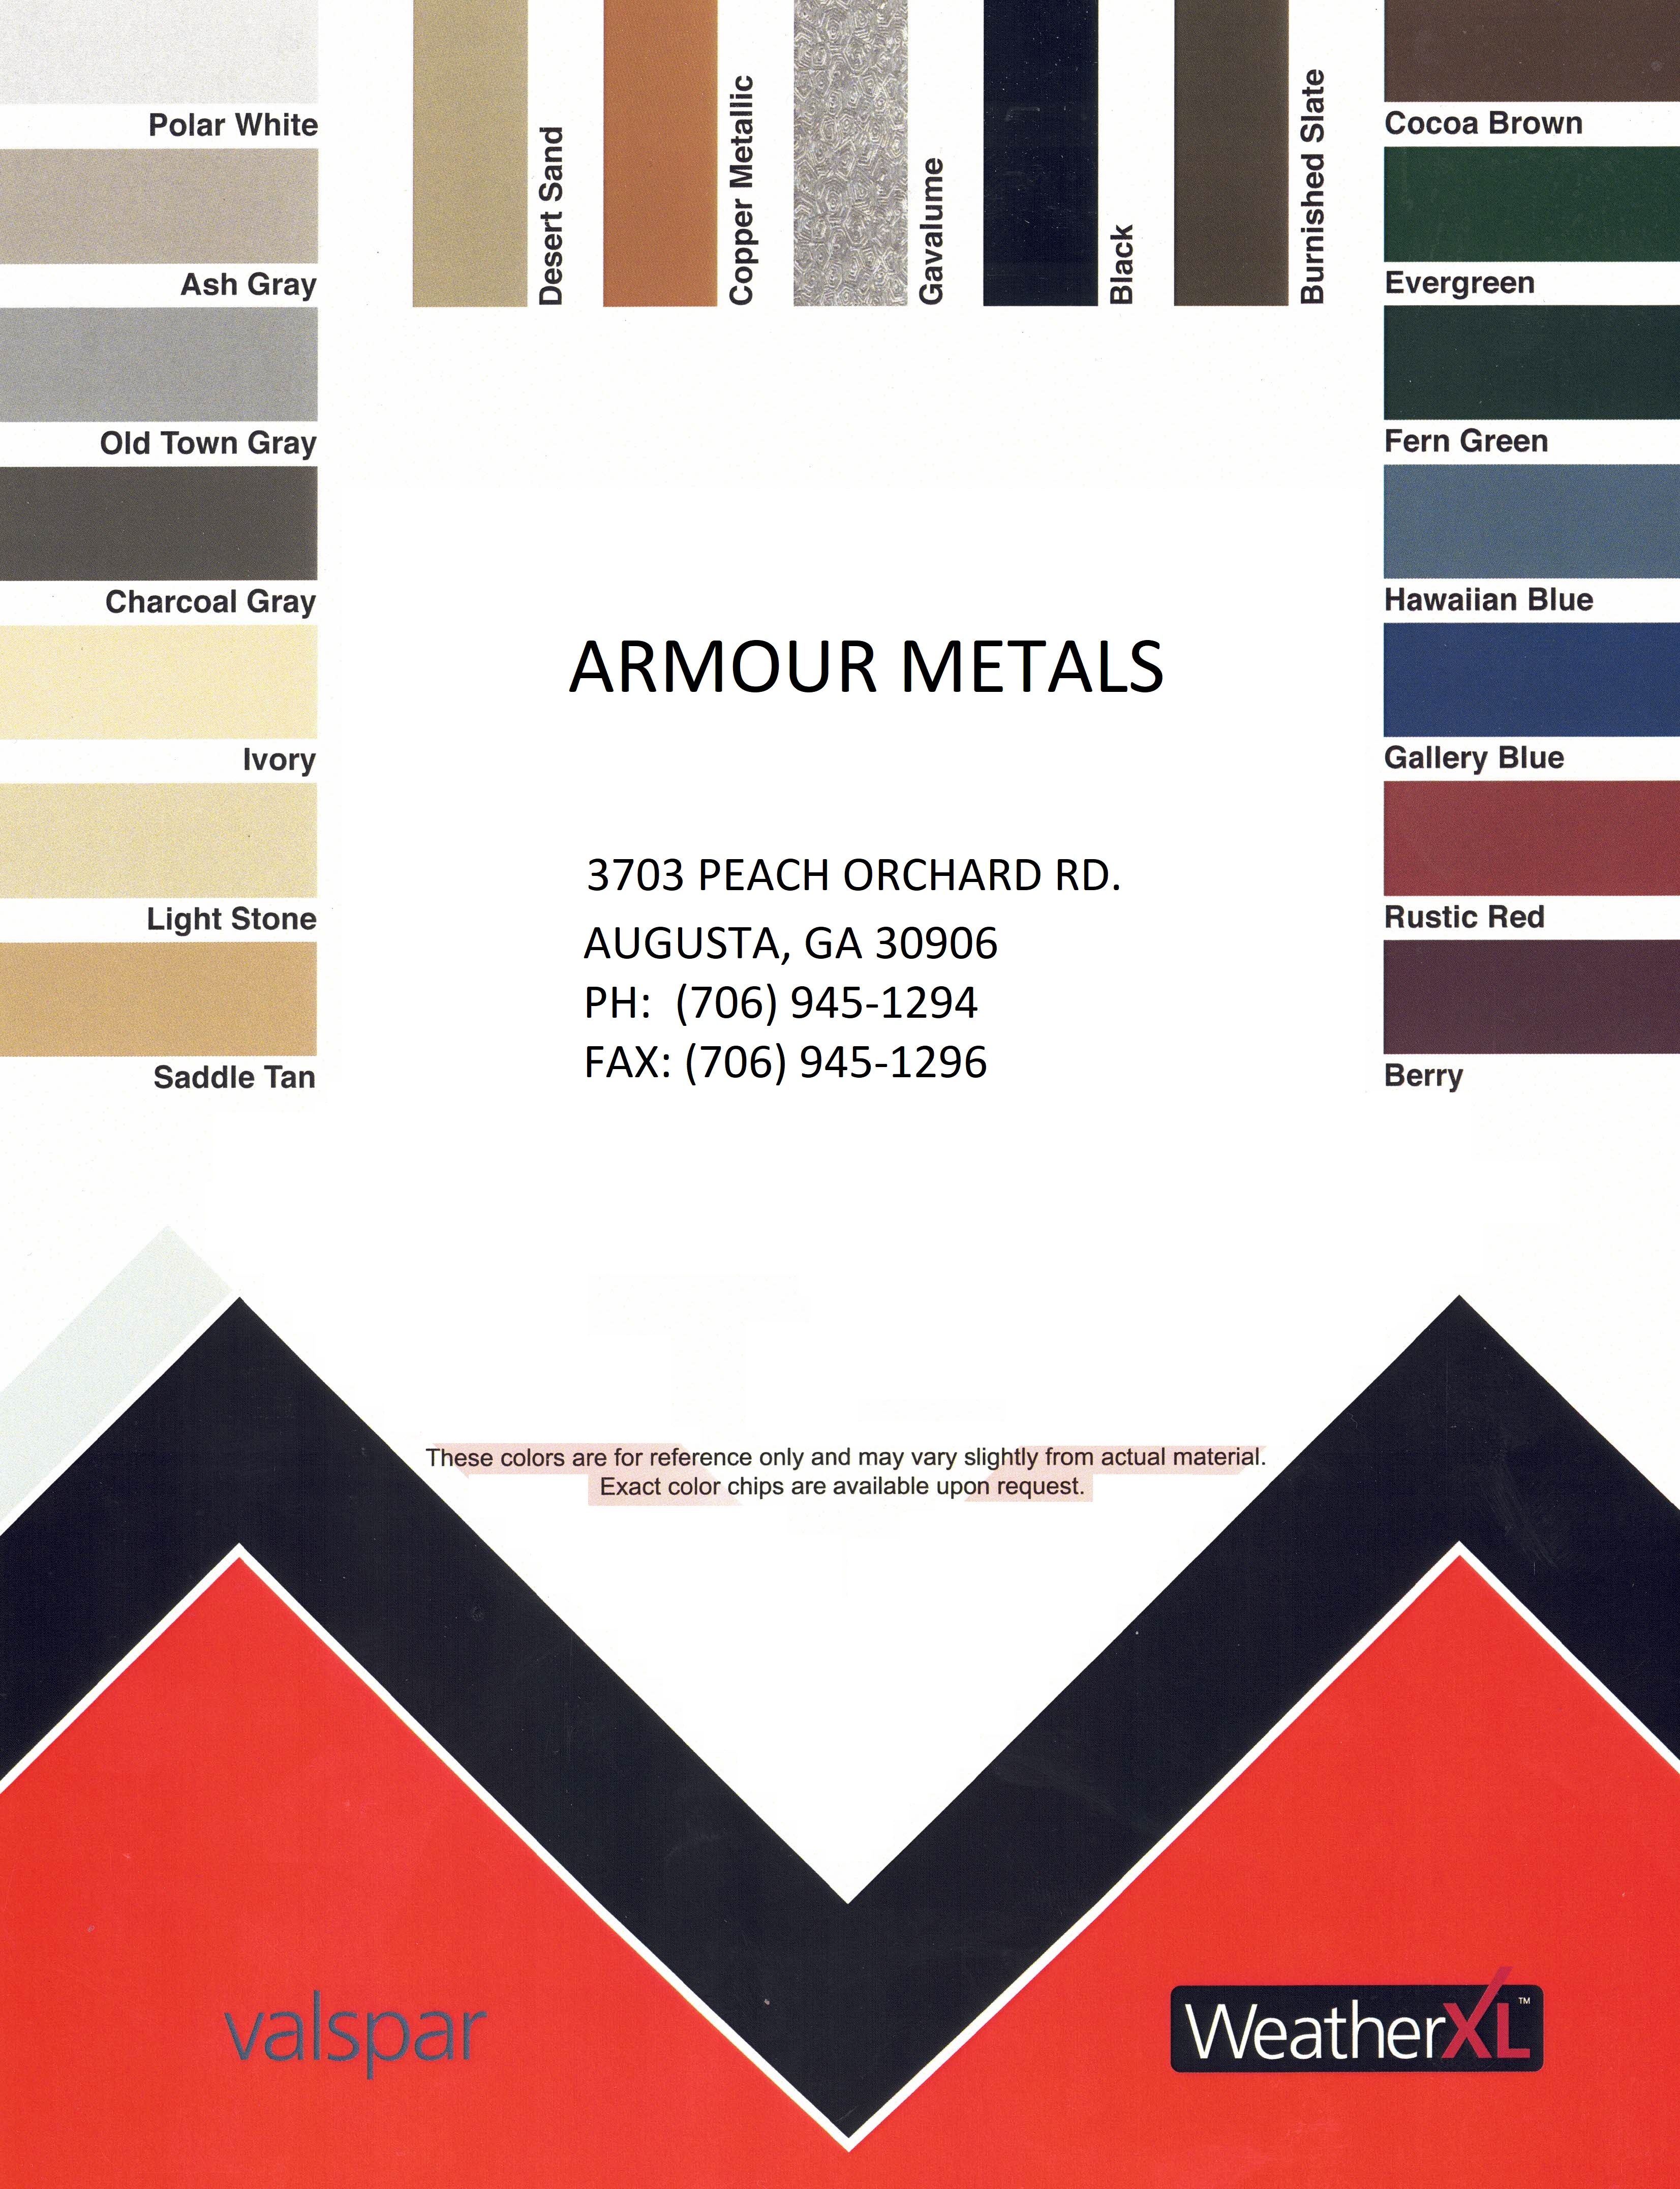 Armour Metals - Metal Roofing and Pole Barns - Color Chart Offer